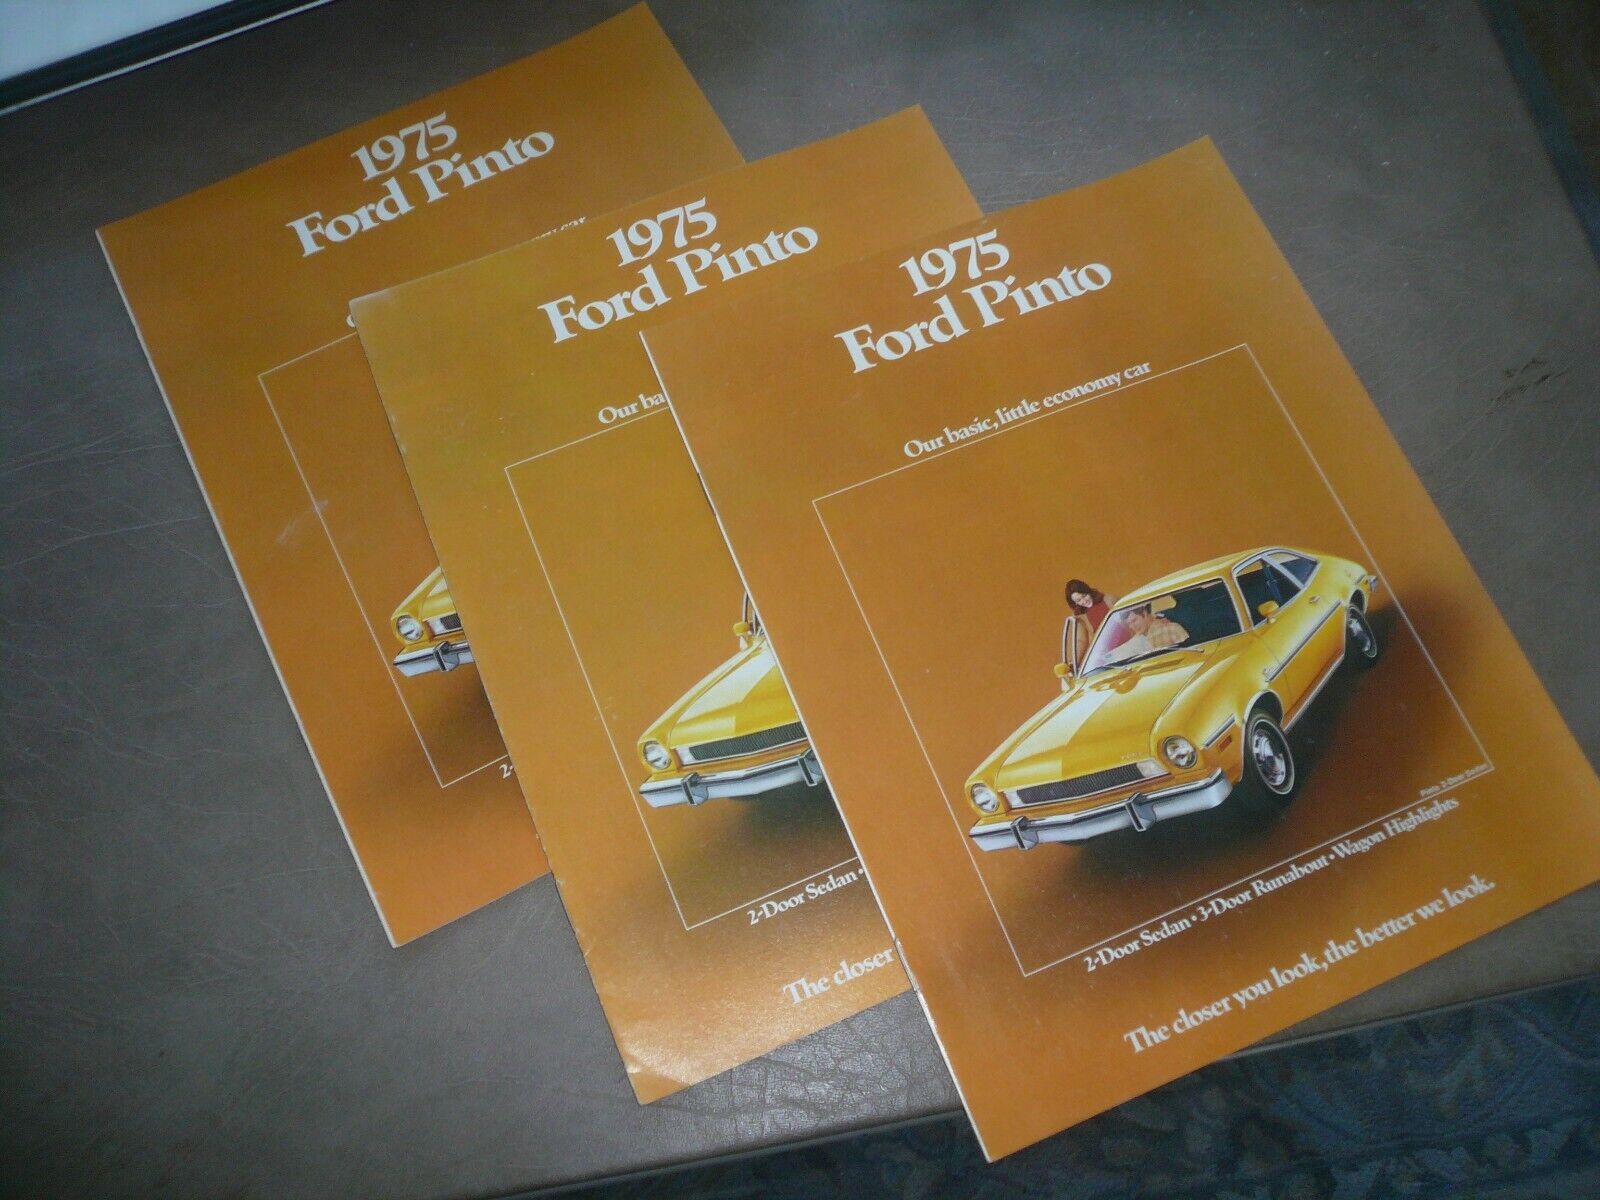 1975 Ford Pinto Sales Brochure - Original - Three for One Price